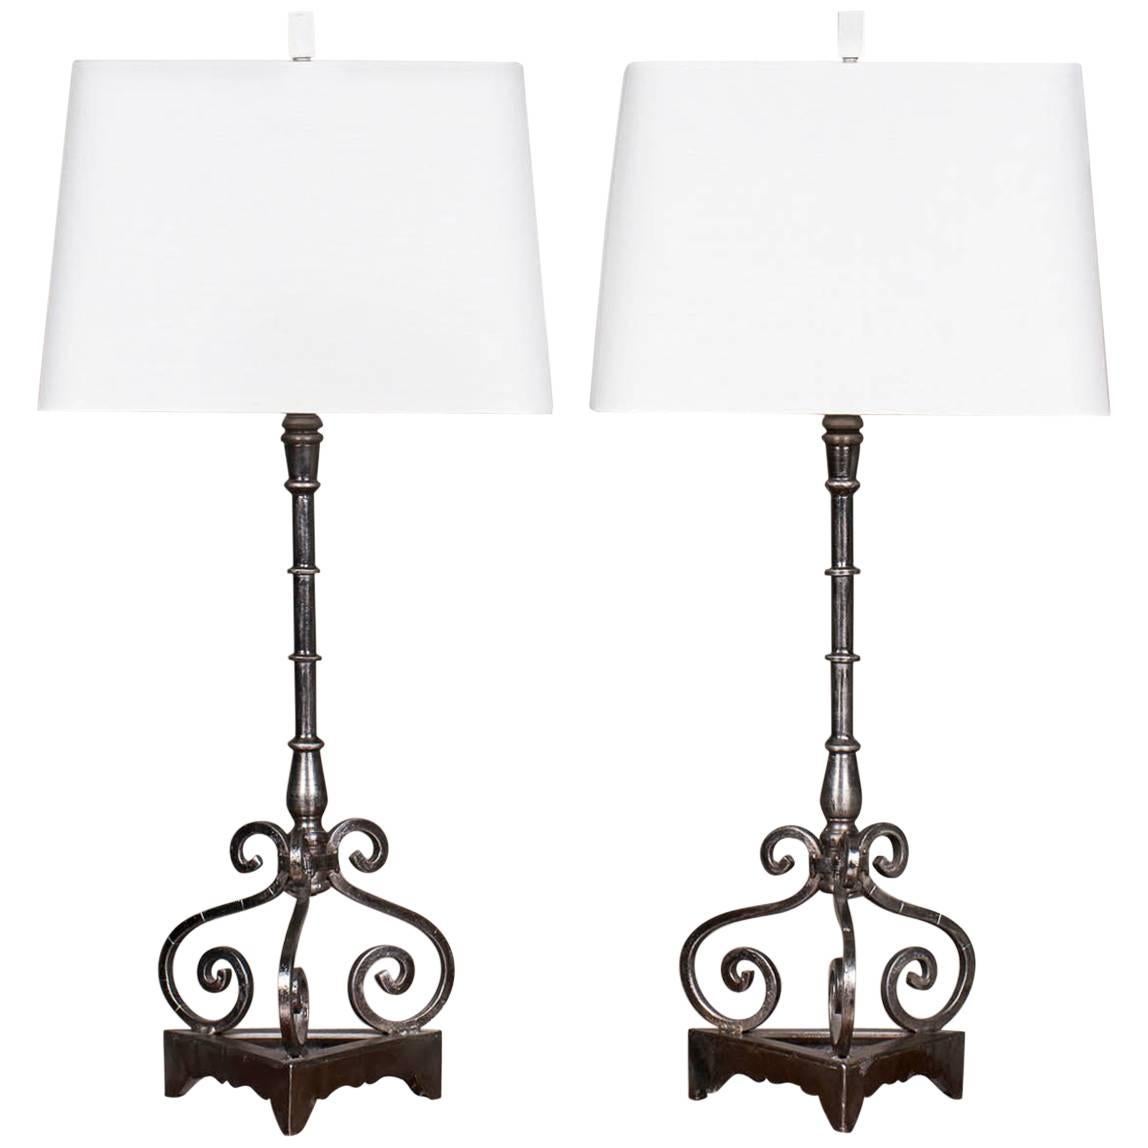 Pair of Modern Steel Iron Lamps Found in France